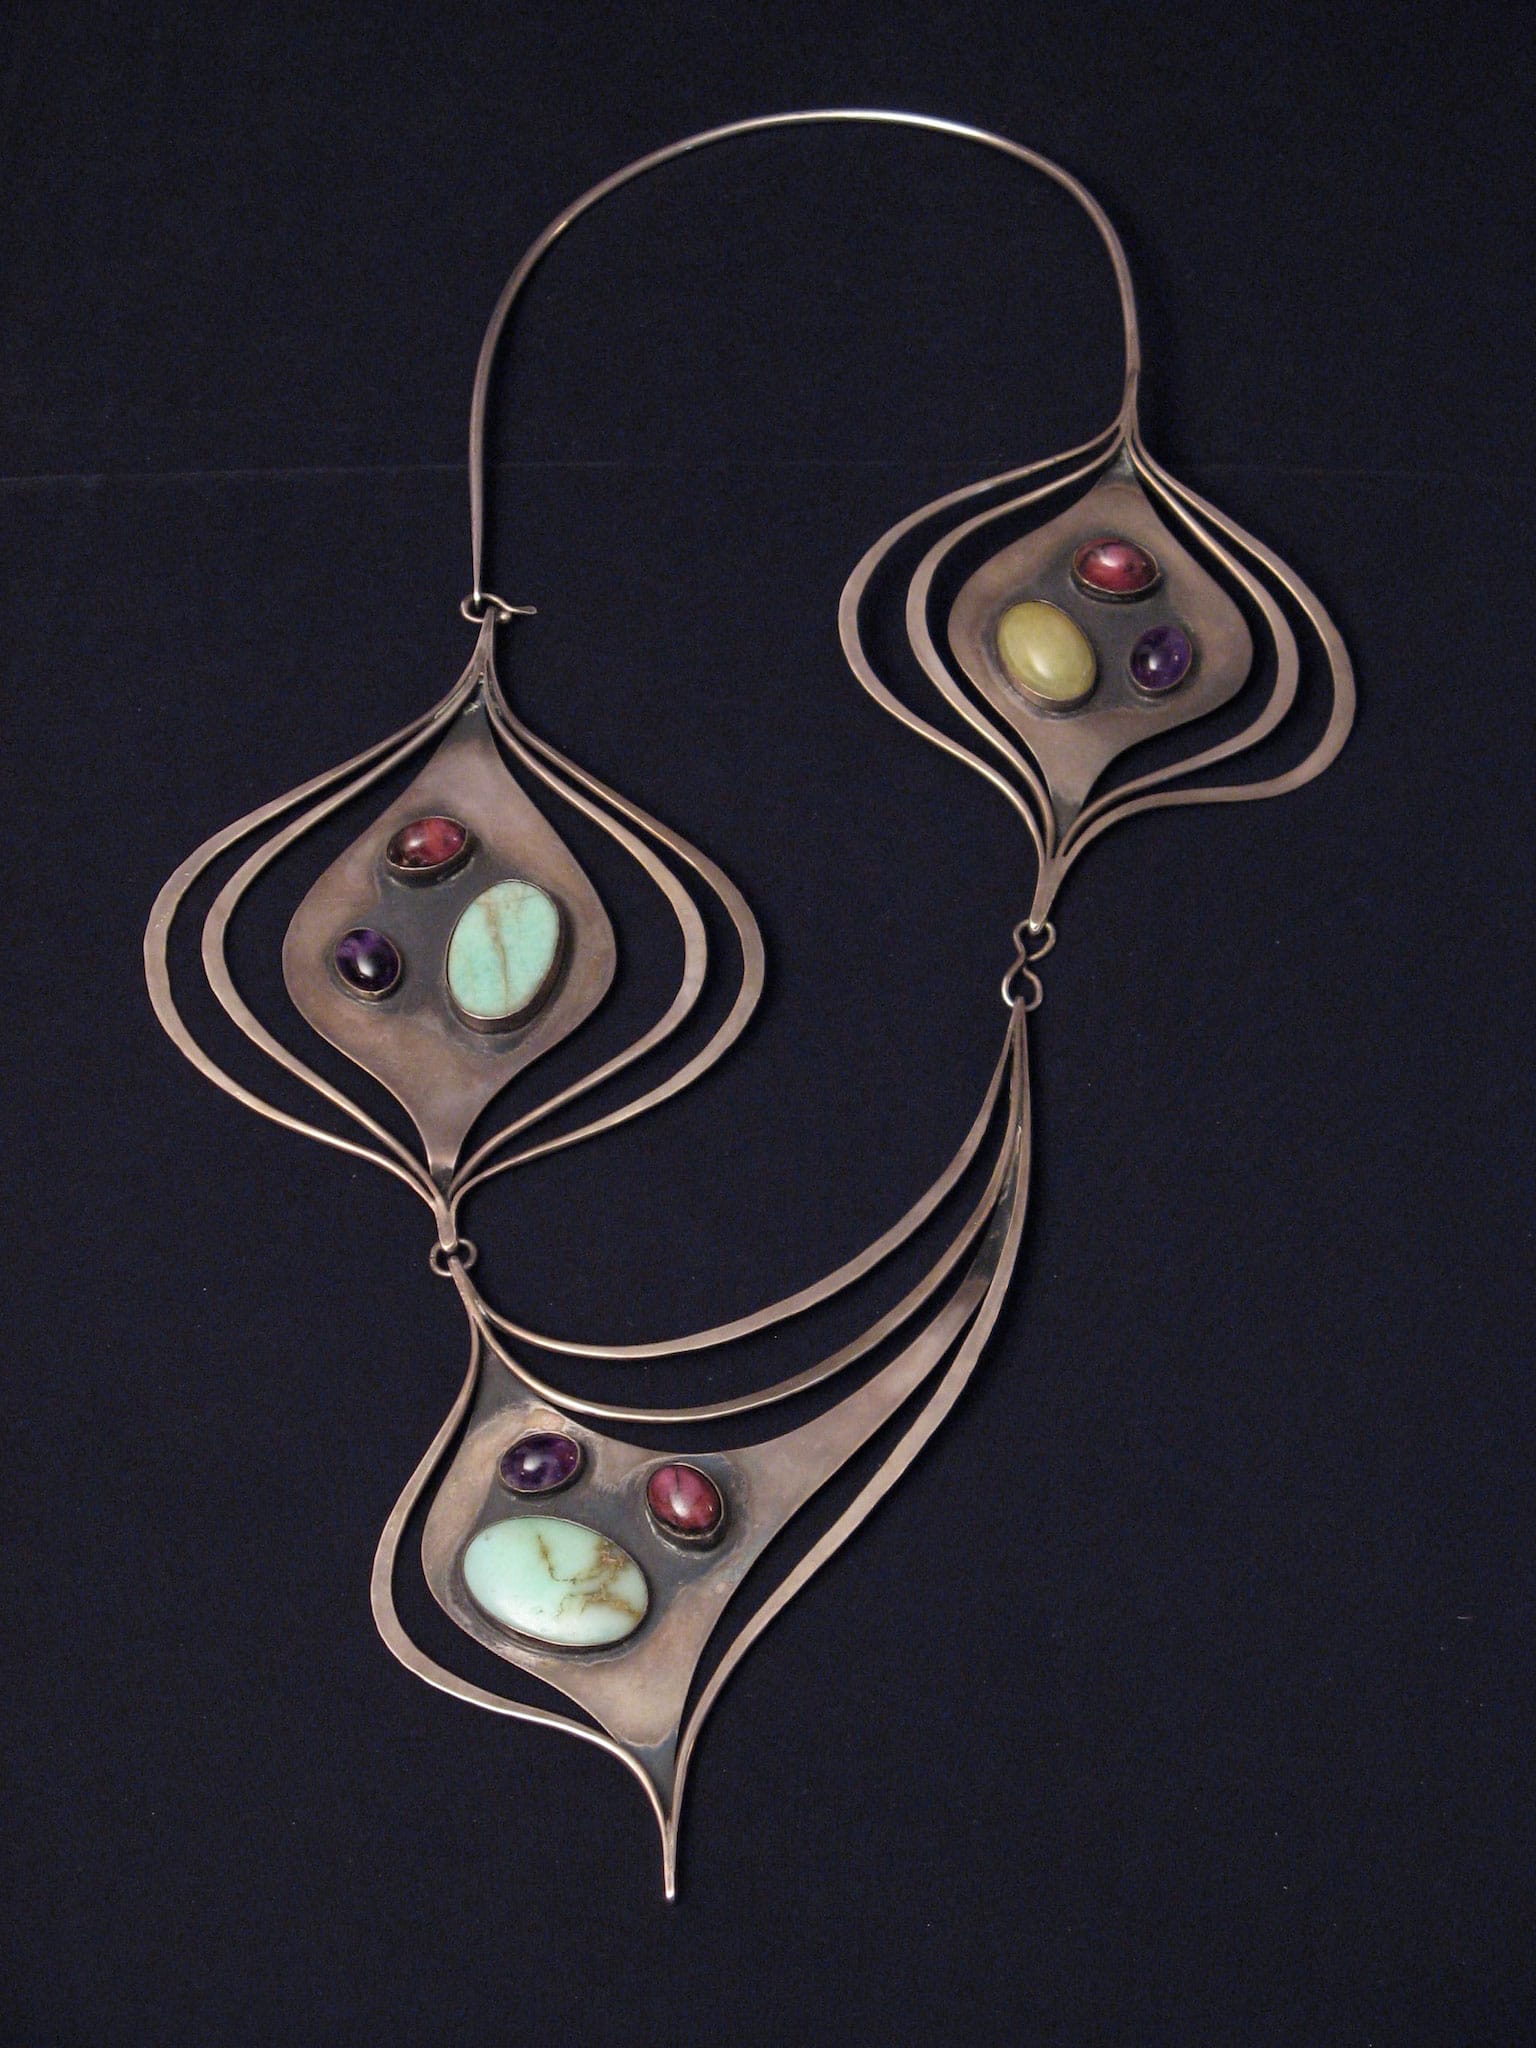 Art Smith, Ellington Necklace. Courtesy of the Estate of Art Smith. JEWELRY episode of Craft in America